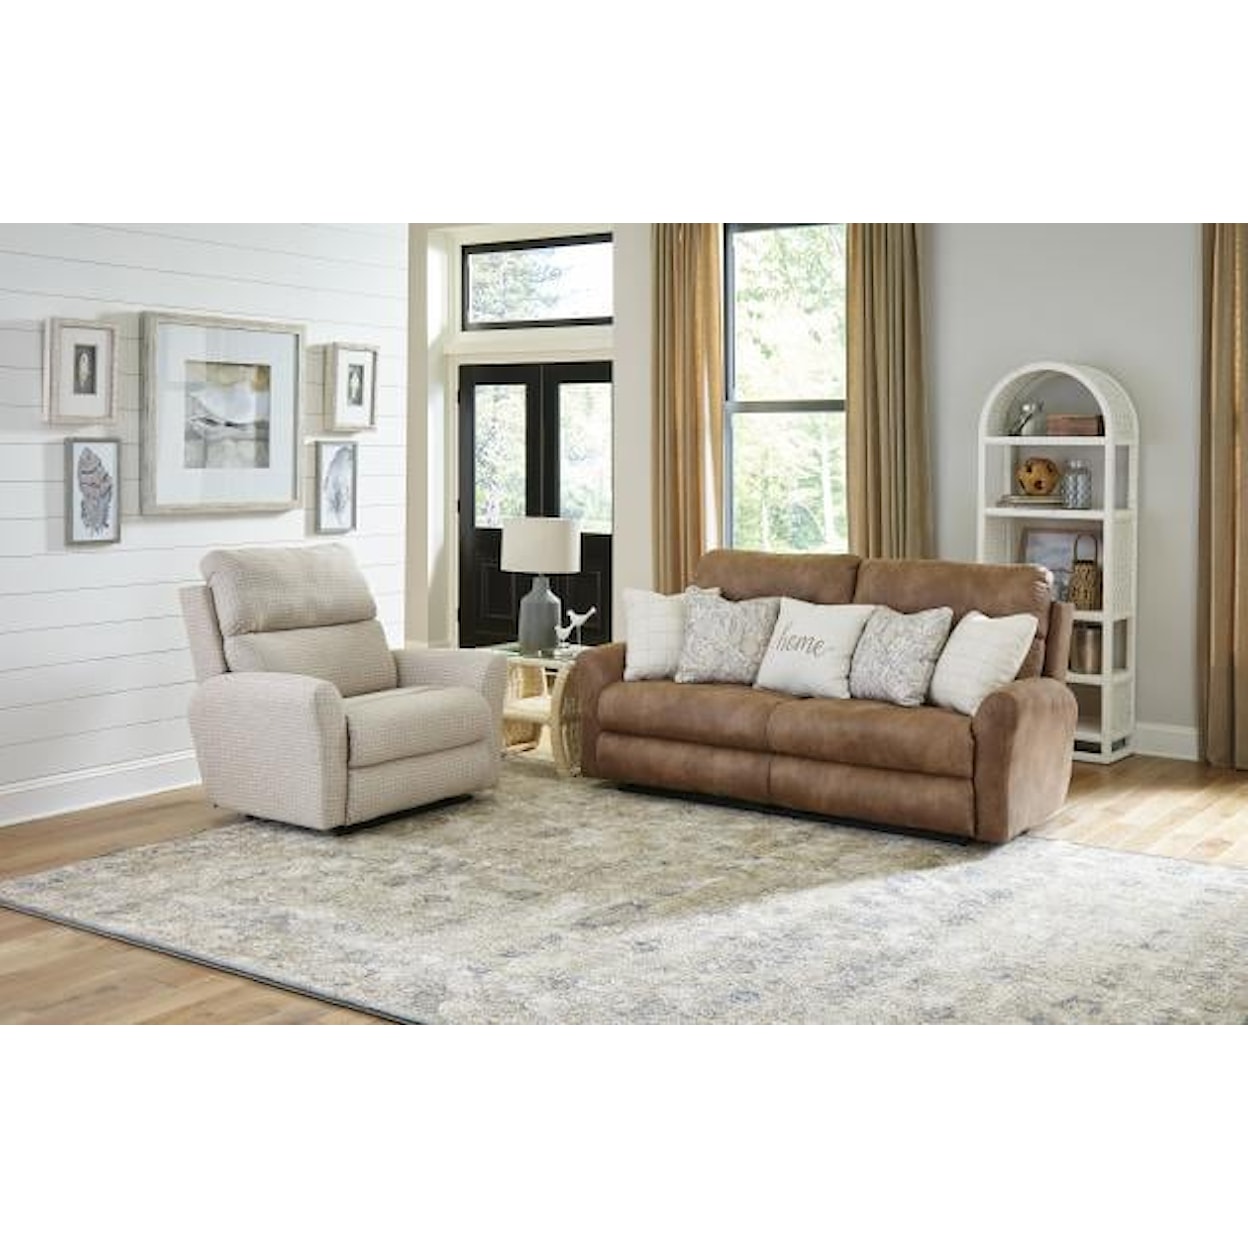 Catnapper 388 Justine Lay Flat Extra Wide Recliner